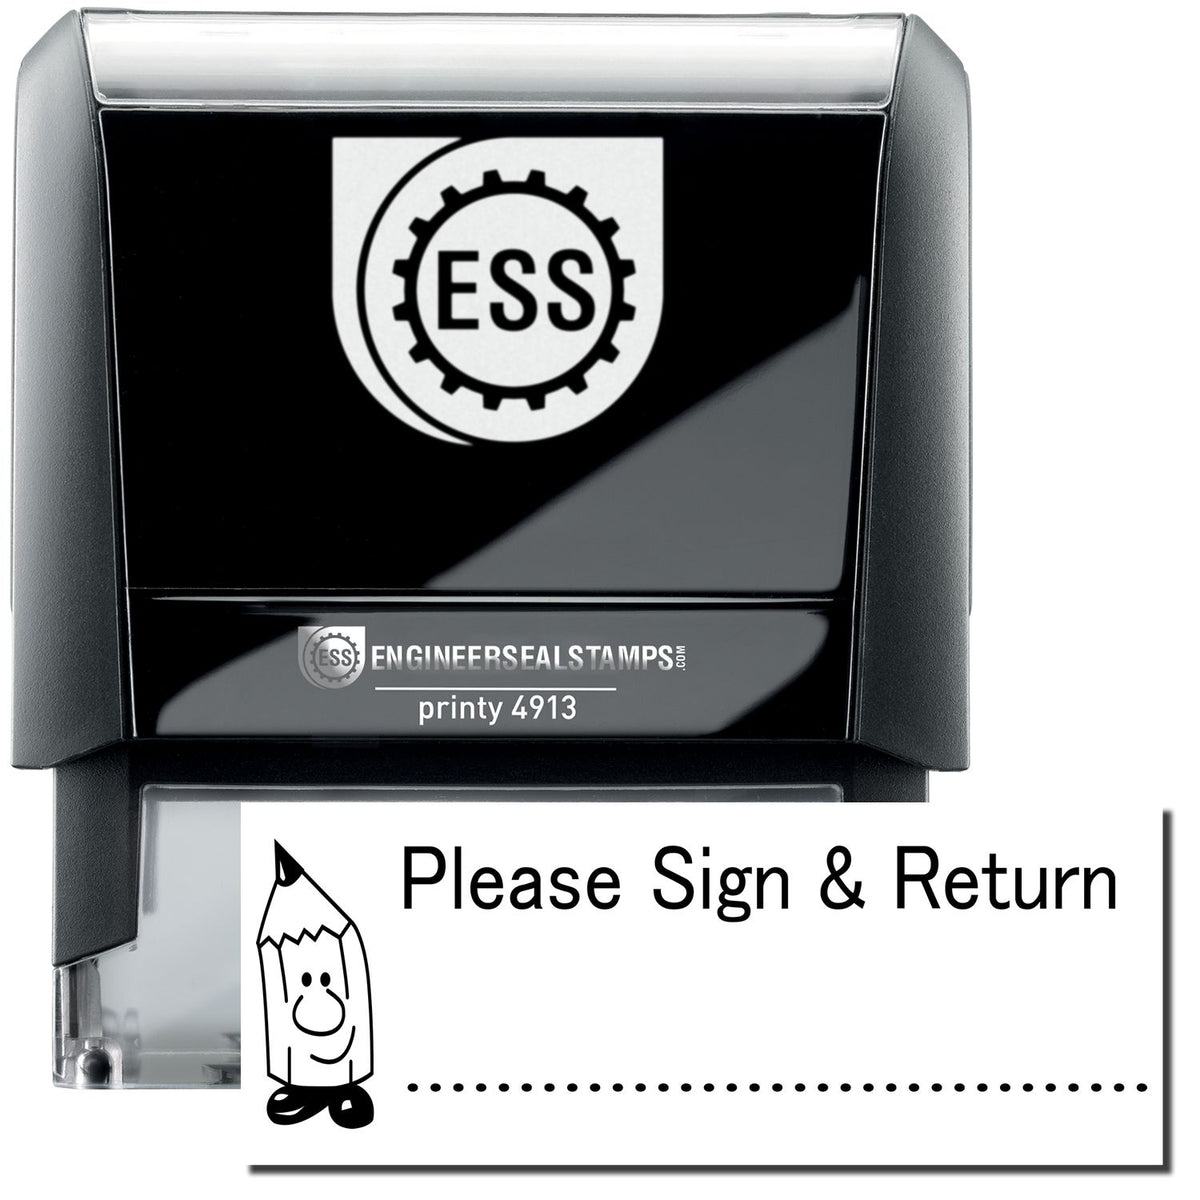 A self-inking stamp with a stamped image showing how the text &quot;Please Sign &amp; Return&quot; in a large narrow font with a dotted line under the text and an image of a sharpened pencil on the left side is displayed by it after stamping.